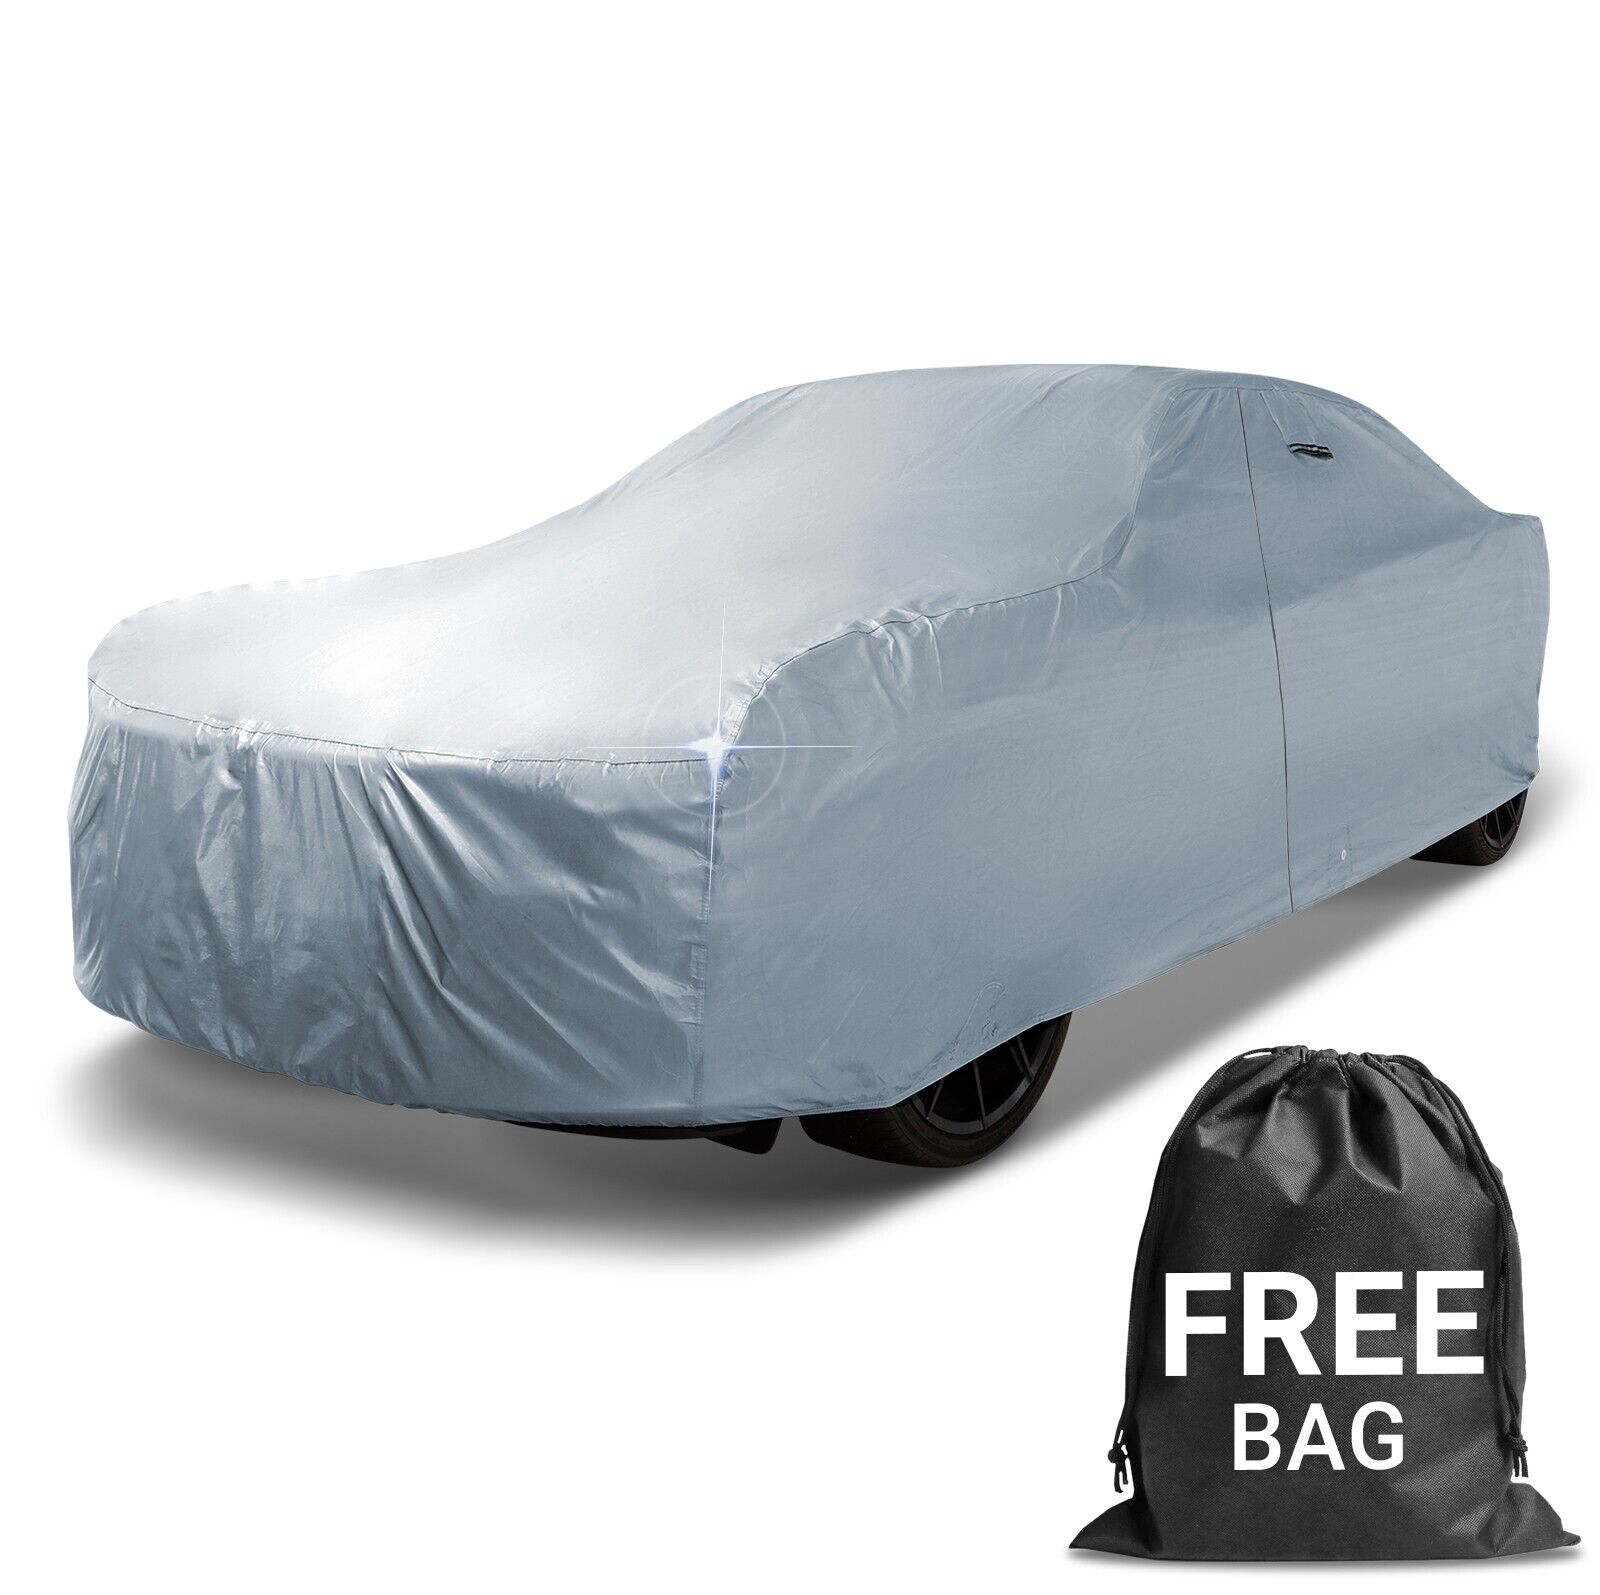 2006-2011 Chevy HHR Custom Car Cover - All-Weather Waterproof Outdoor Protection